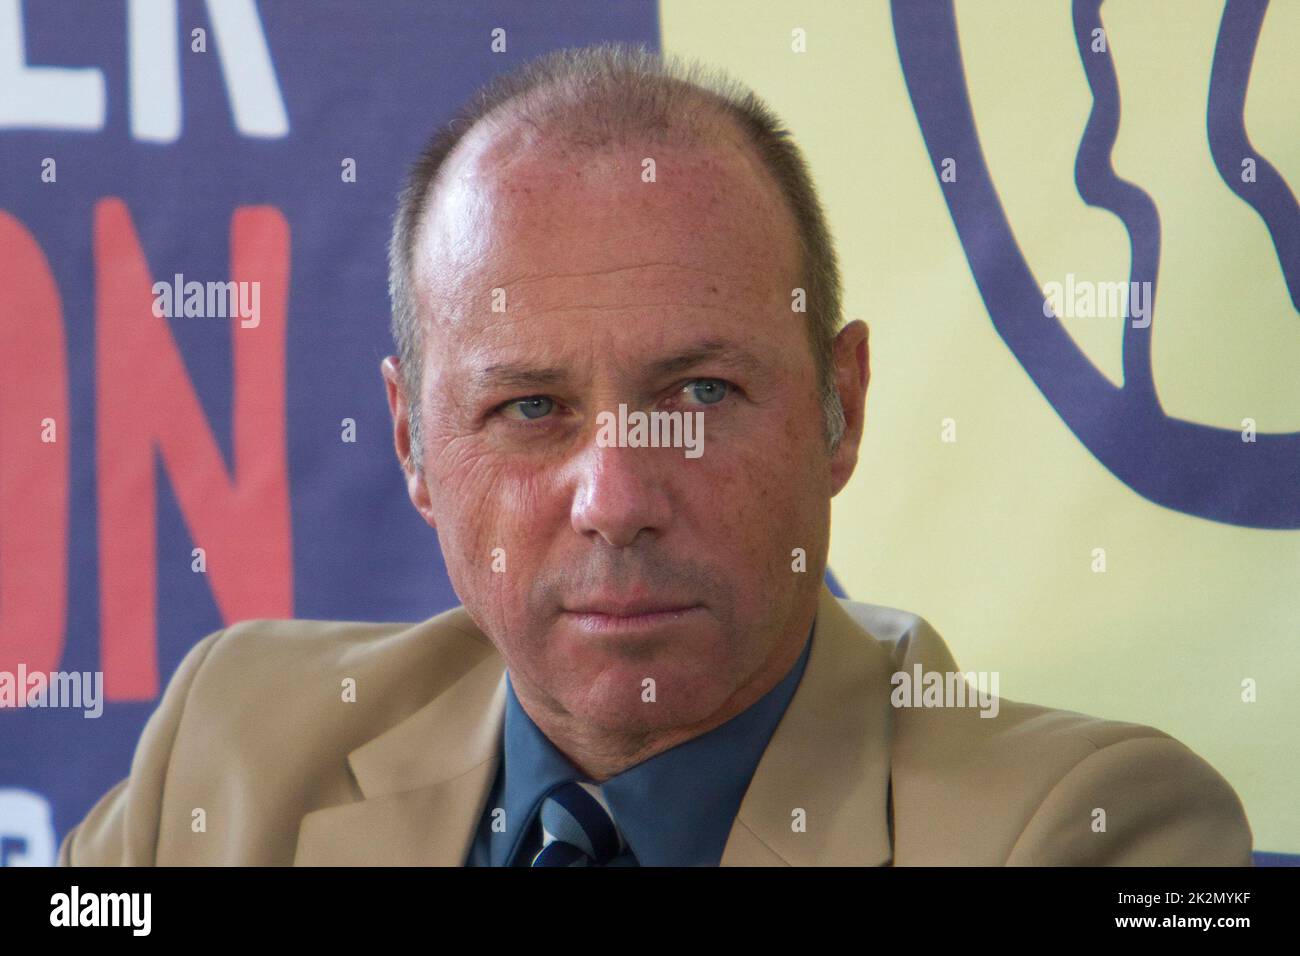 Torino, Italy. 22nd September 2022. Giuseppe Lavazza, vice President of Lavazza Group, attends a conference at 2022 Terra Madre Salone del Gusto event. Stock Photo